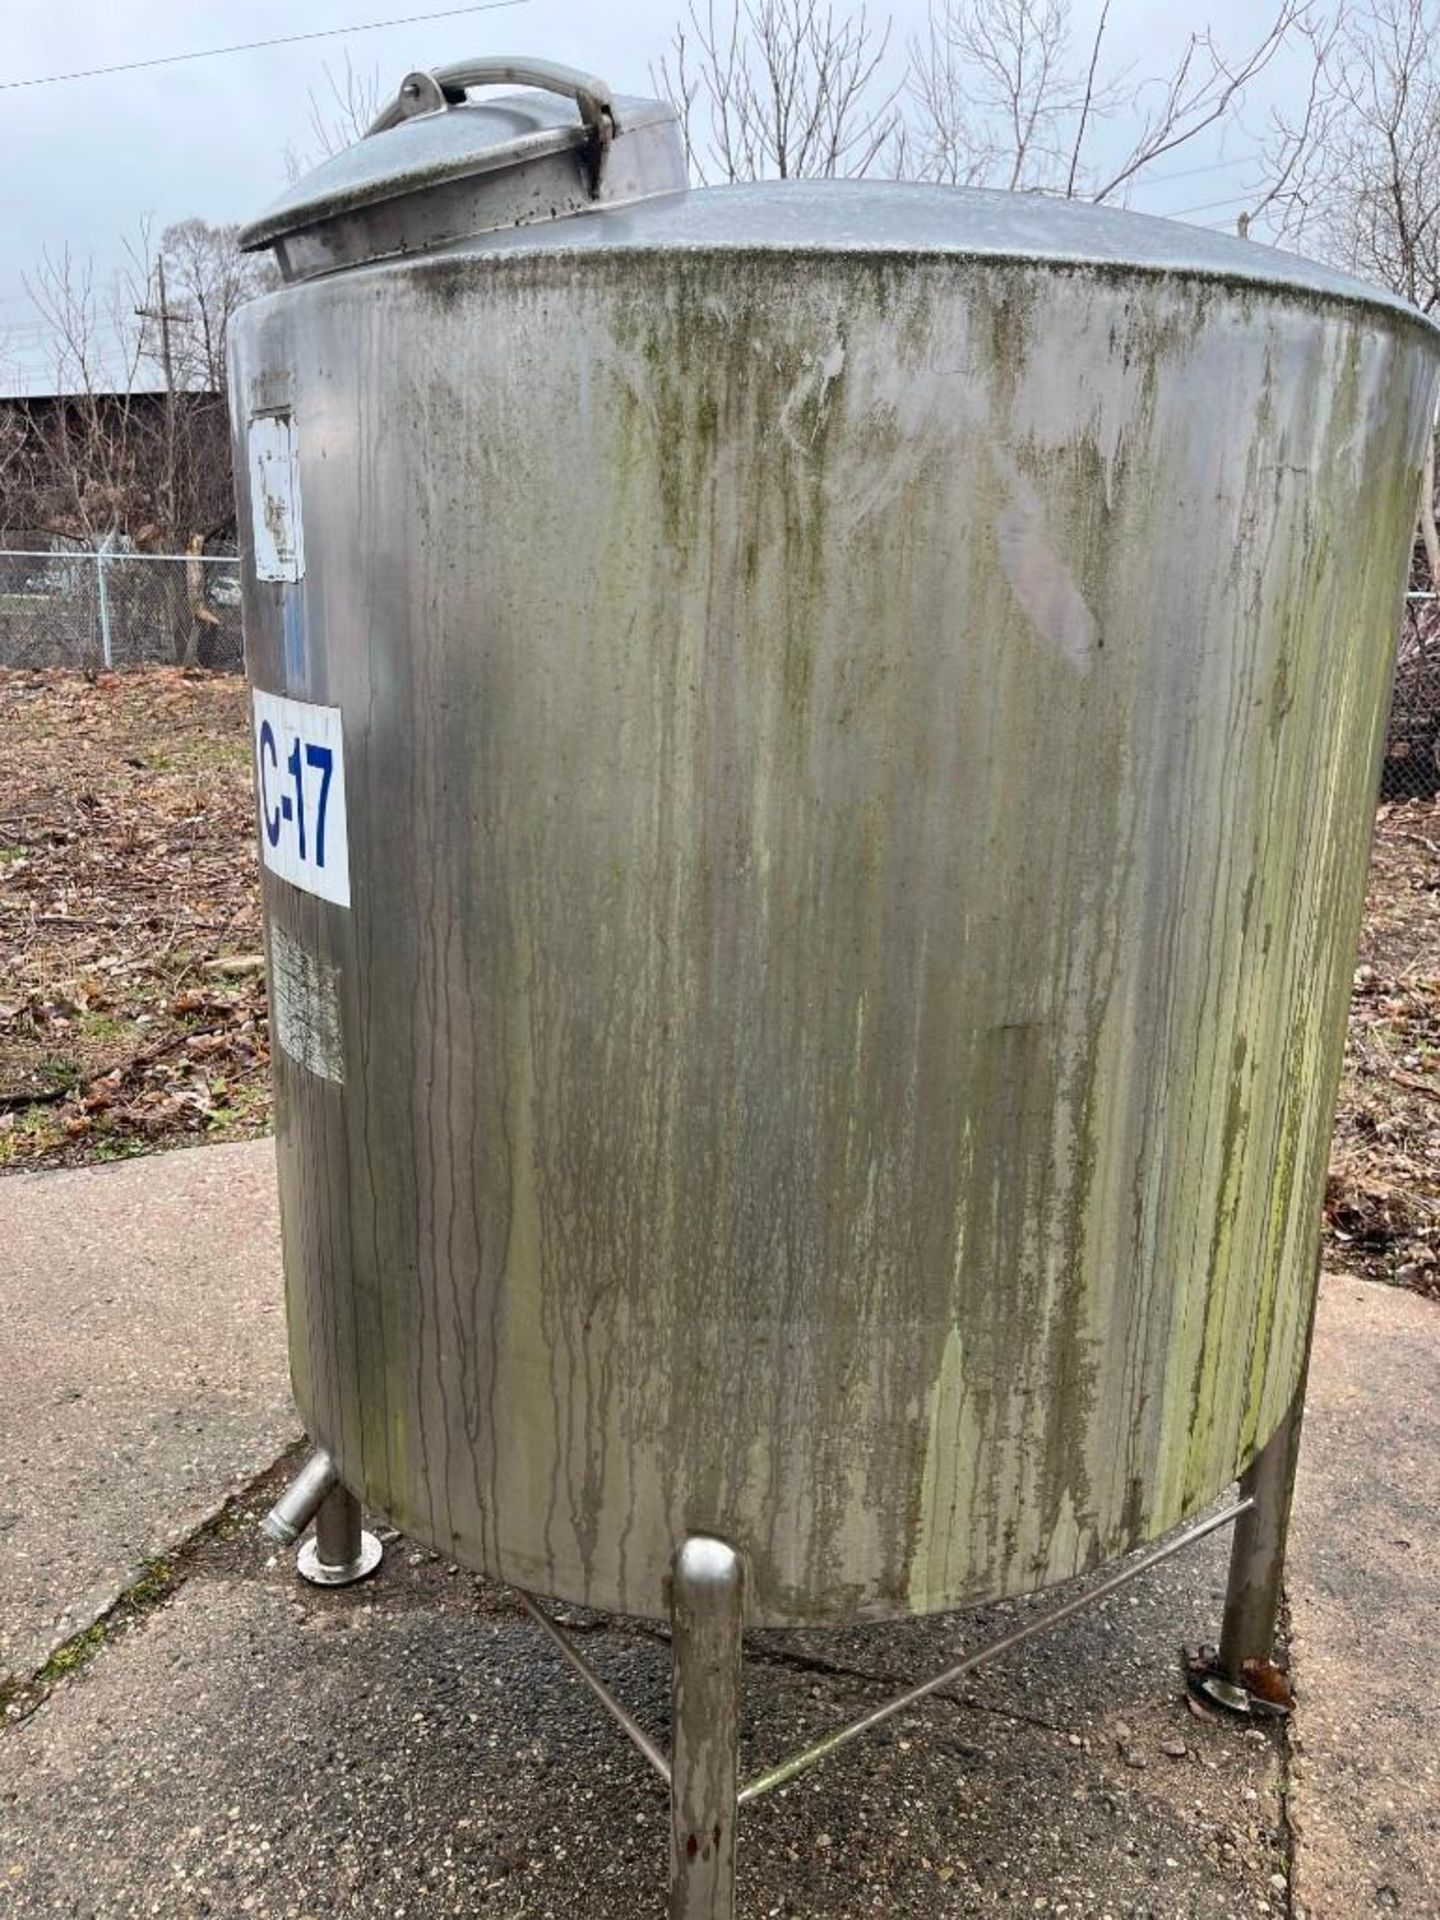 Cream City Boiler Co. Stainless Steel Single Wall Tank, Model F46, S/N: 4226. Has 24" top manhole co - Image 3 of 9